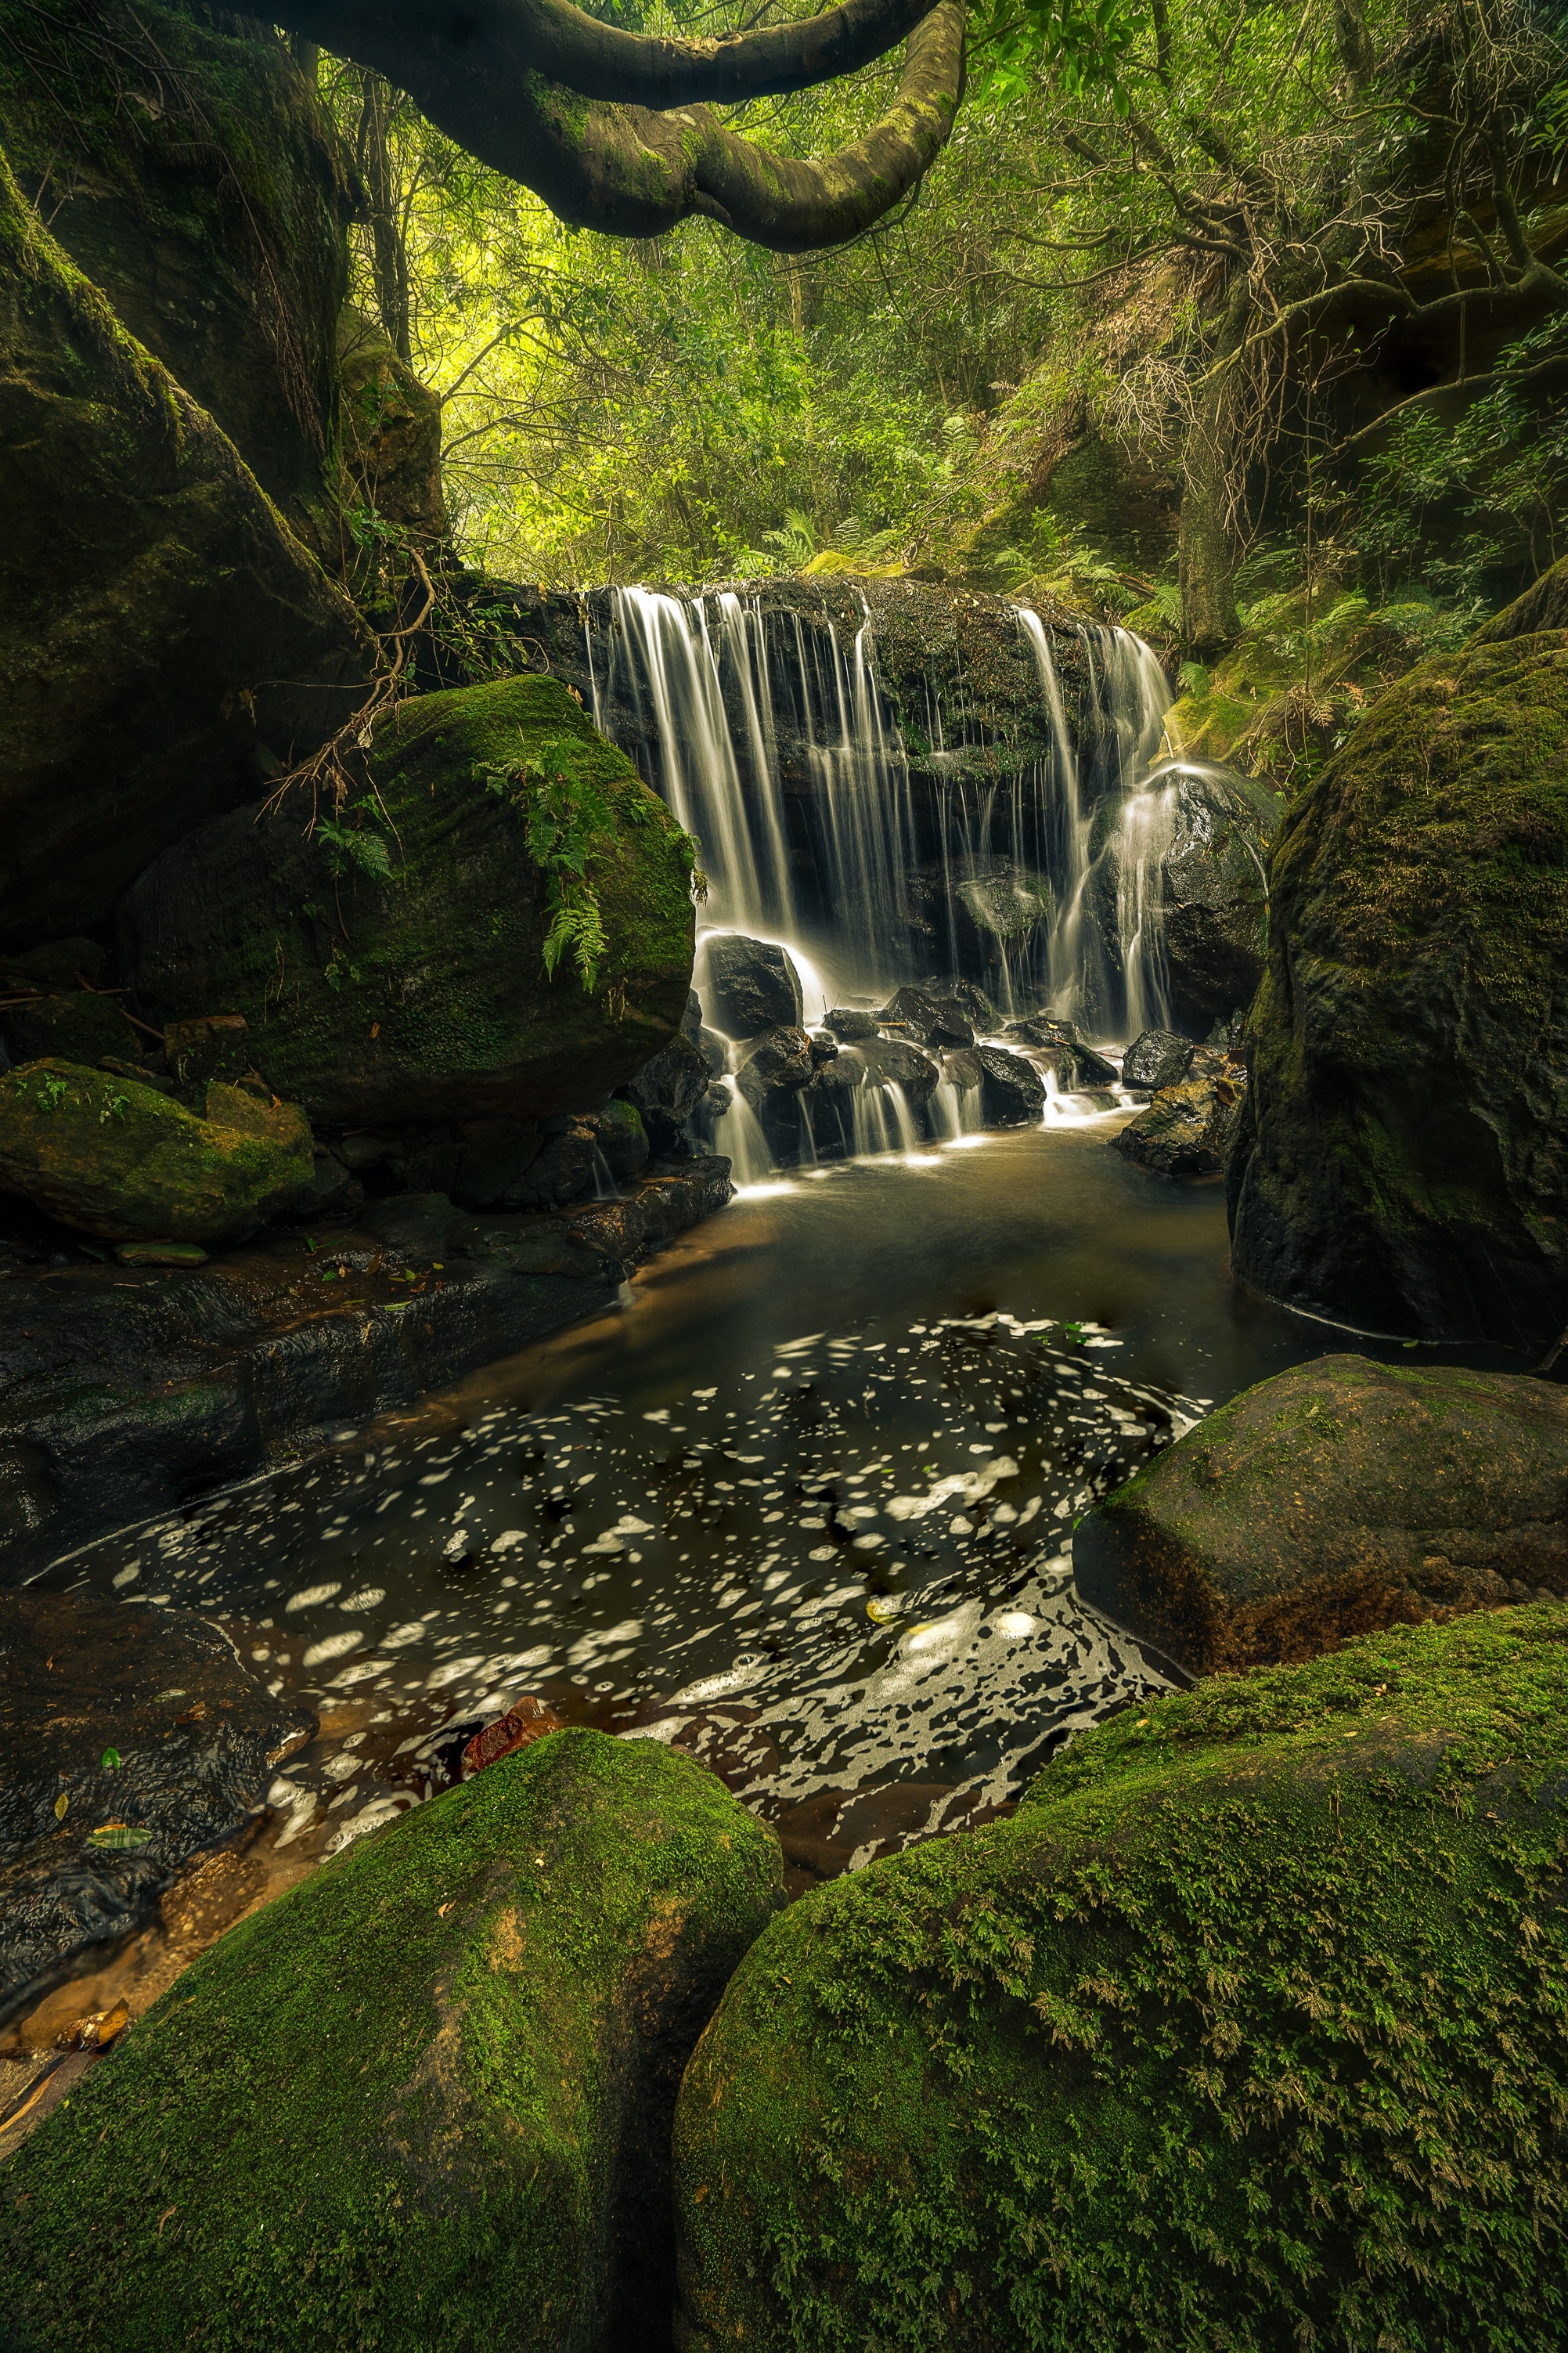 Weeping Rock falls sits just a few metres below the main waterfall at Leura however is usually looked over as the walking track veers in the other direction. Makes for a very quiet and isolated spot on an otherwise very popular walk in the Blue Mountains. #nature  #localsecrets